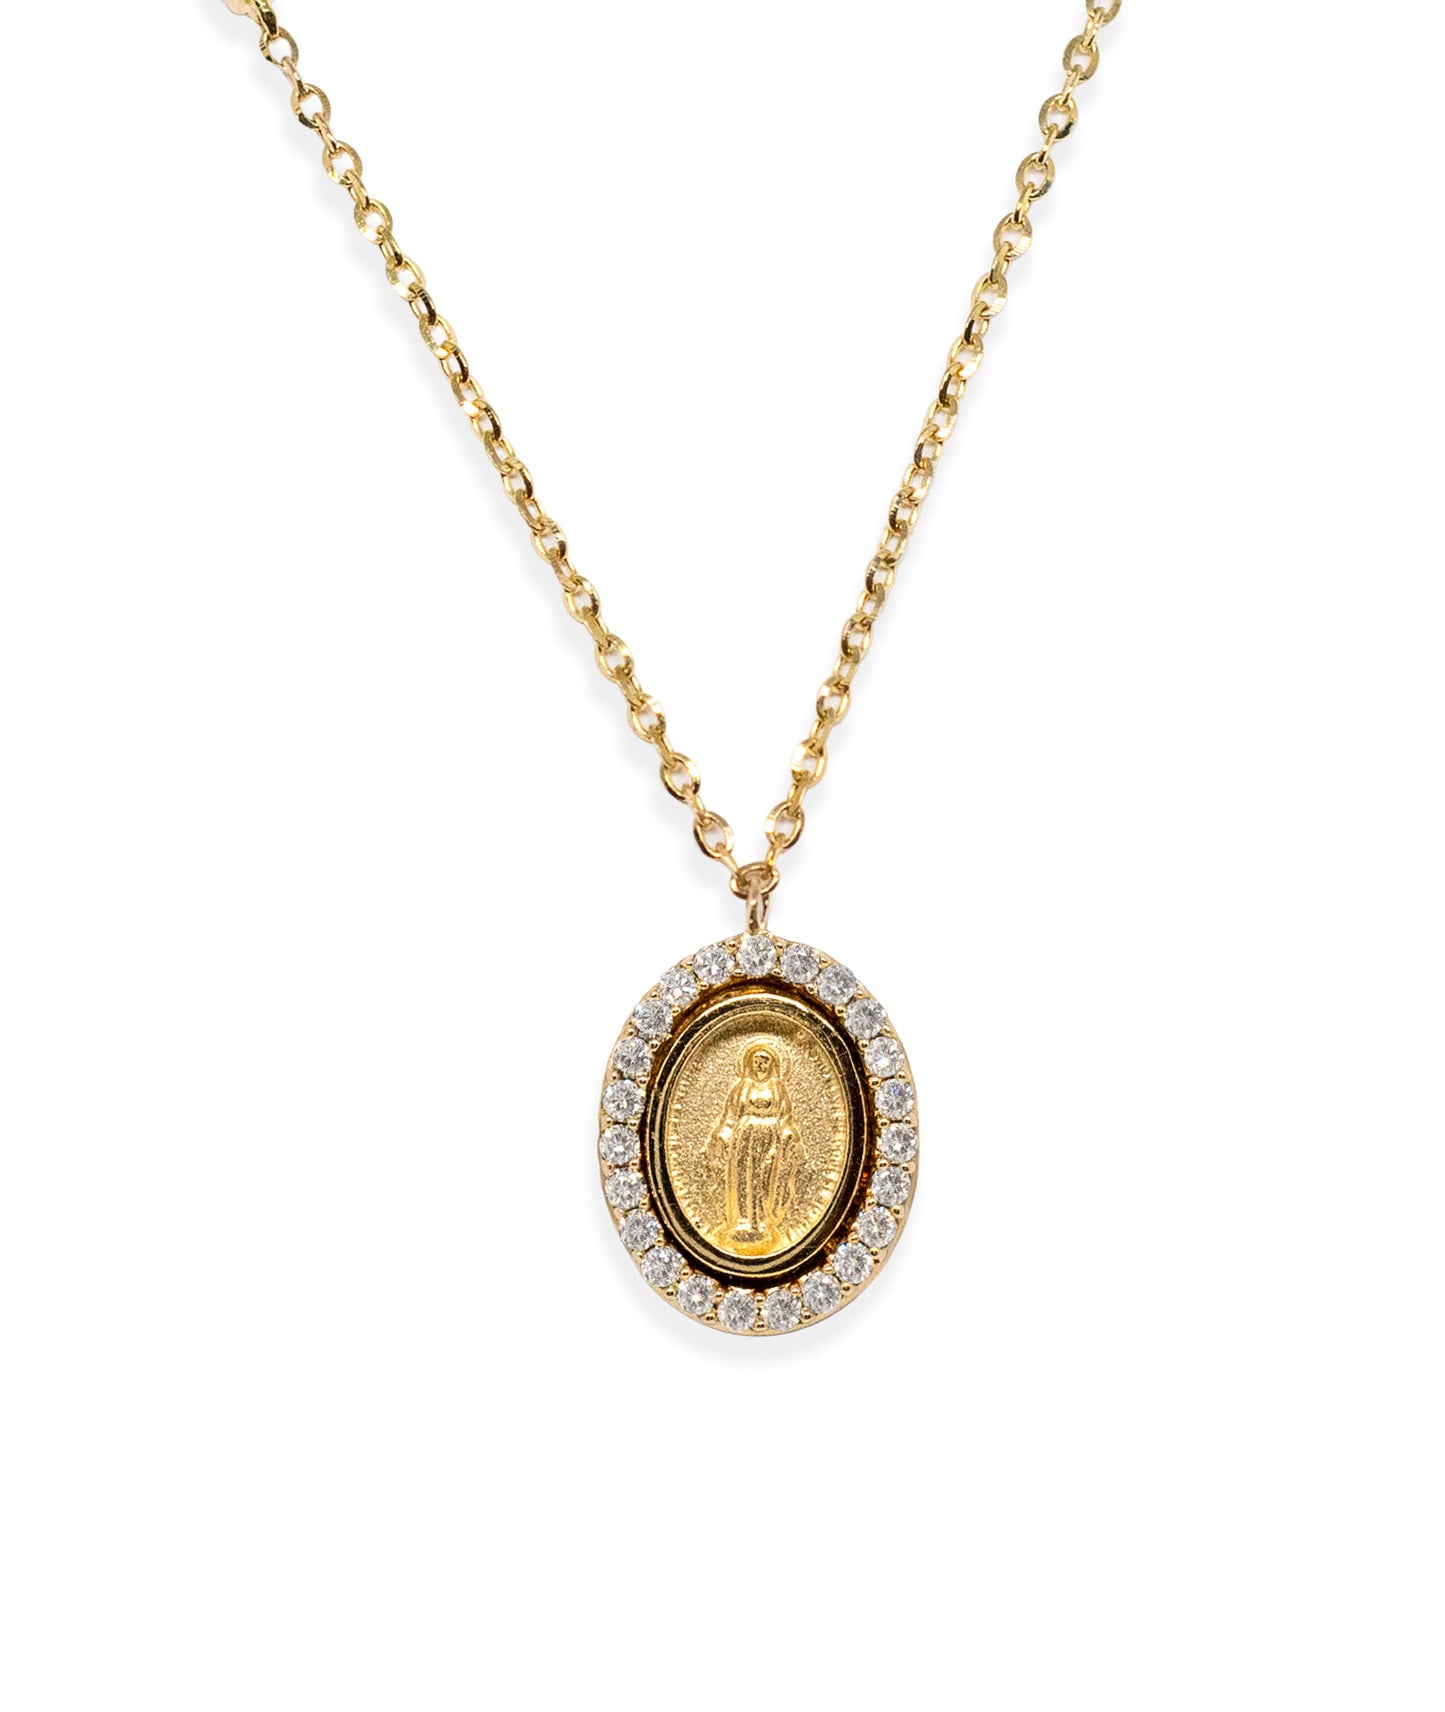 14K Gold Miniature Miraculous Medals with Diamonds